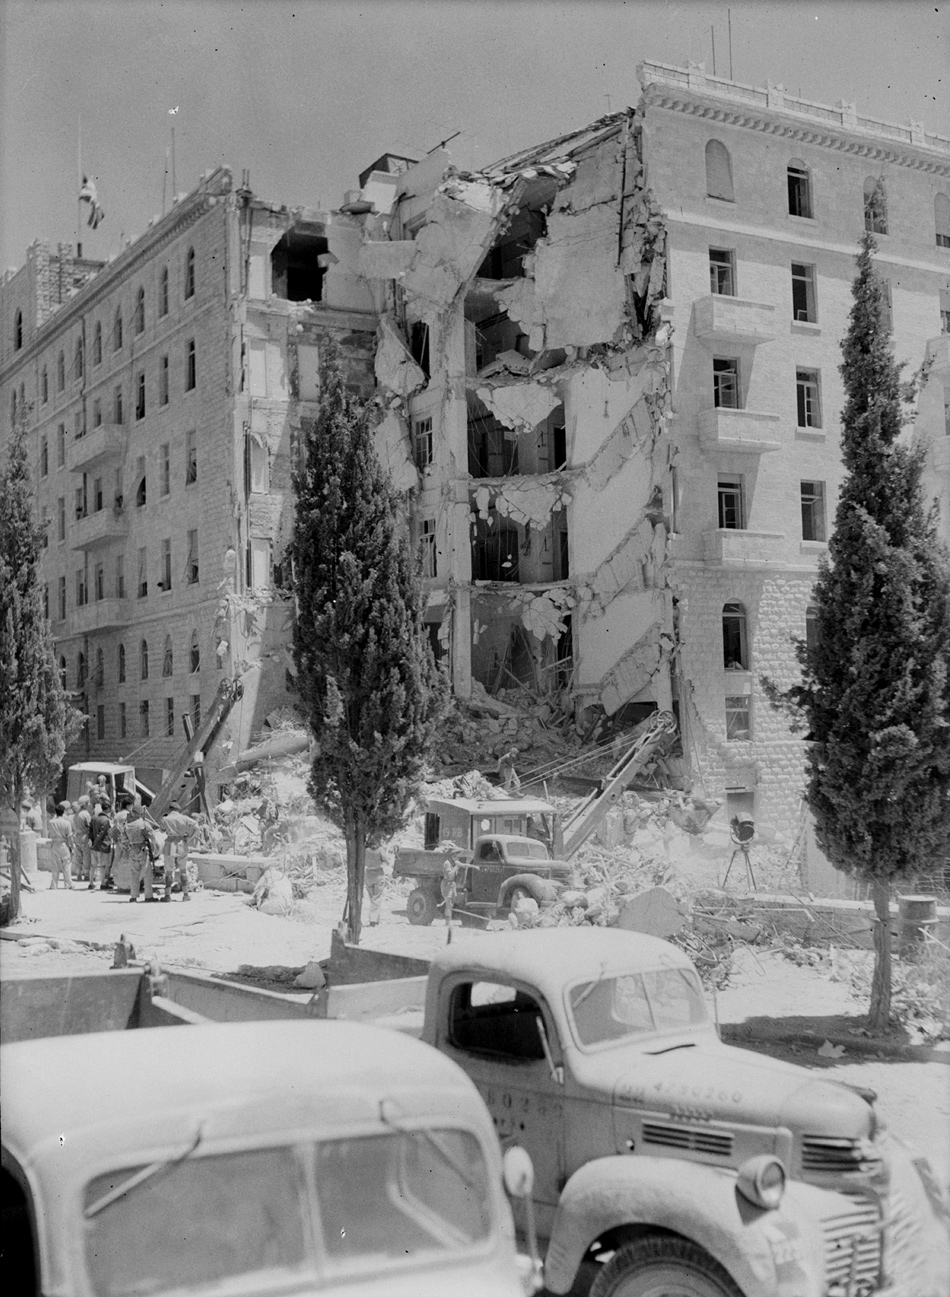 The King David Hotel in Jerusalem, headquarters of the British Mandate Administration, after it was bombed by the Irgun paramilitary group, July 22, 1946
